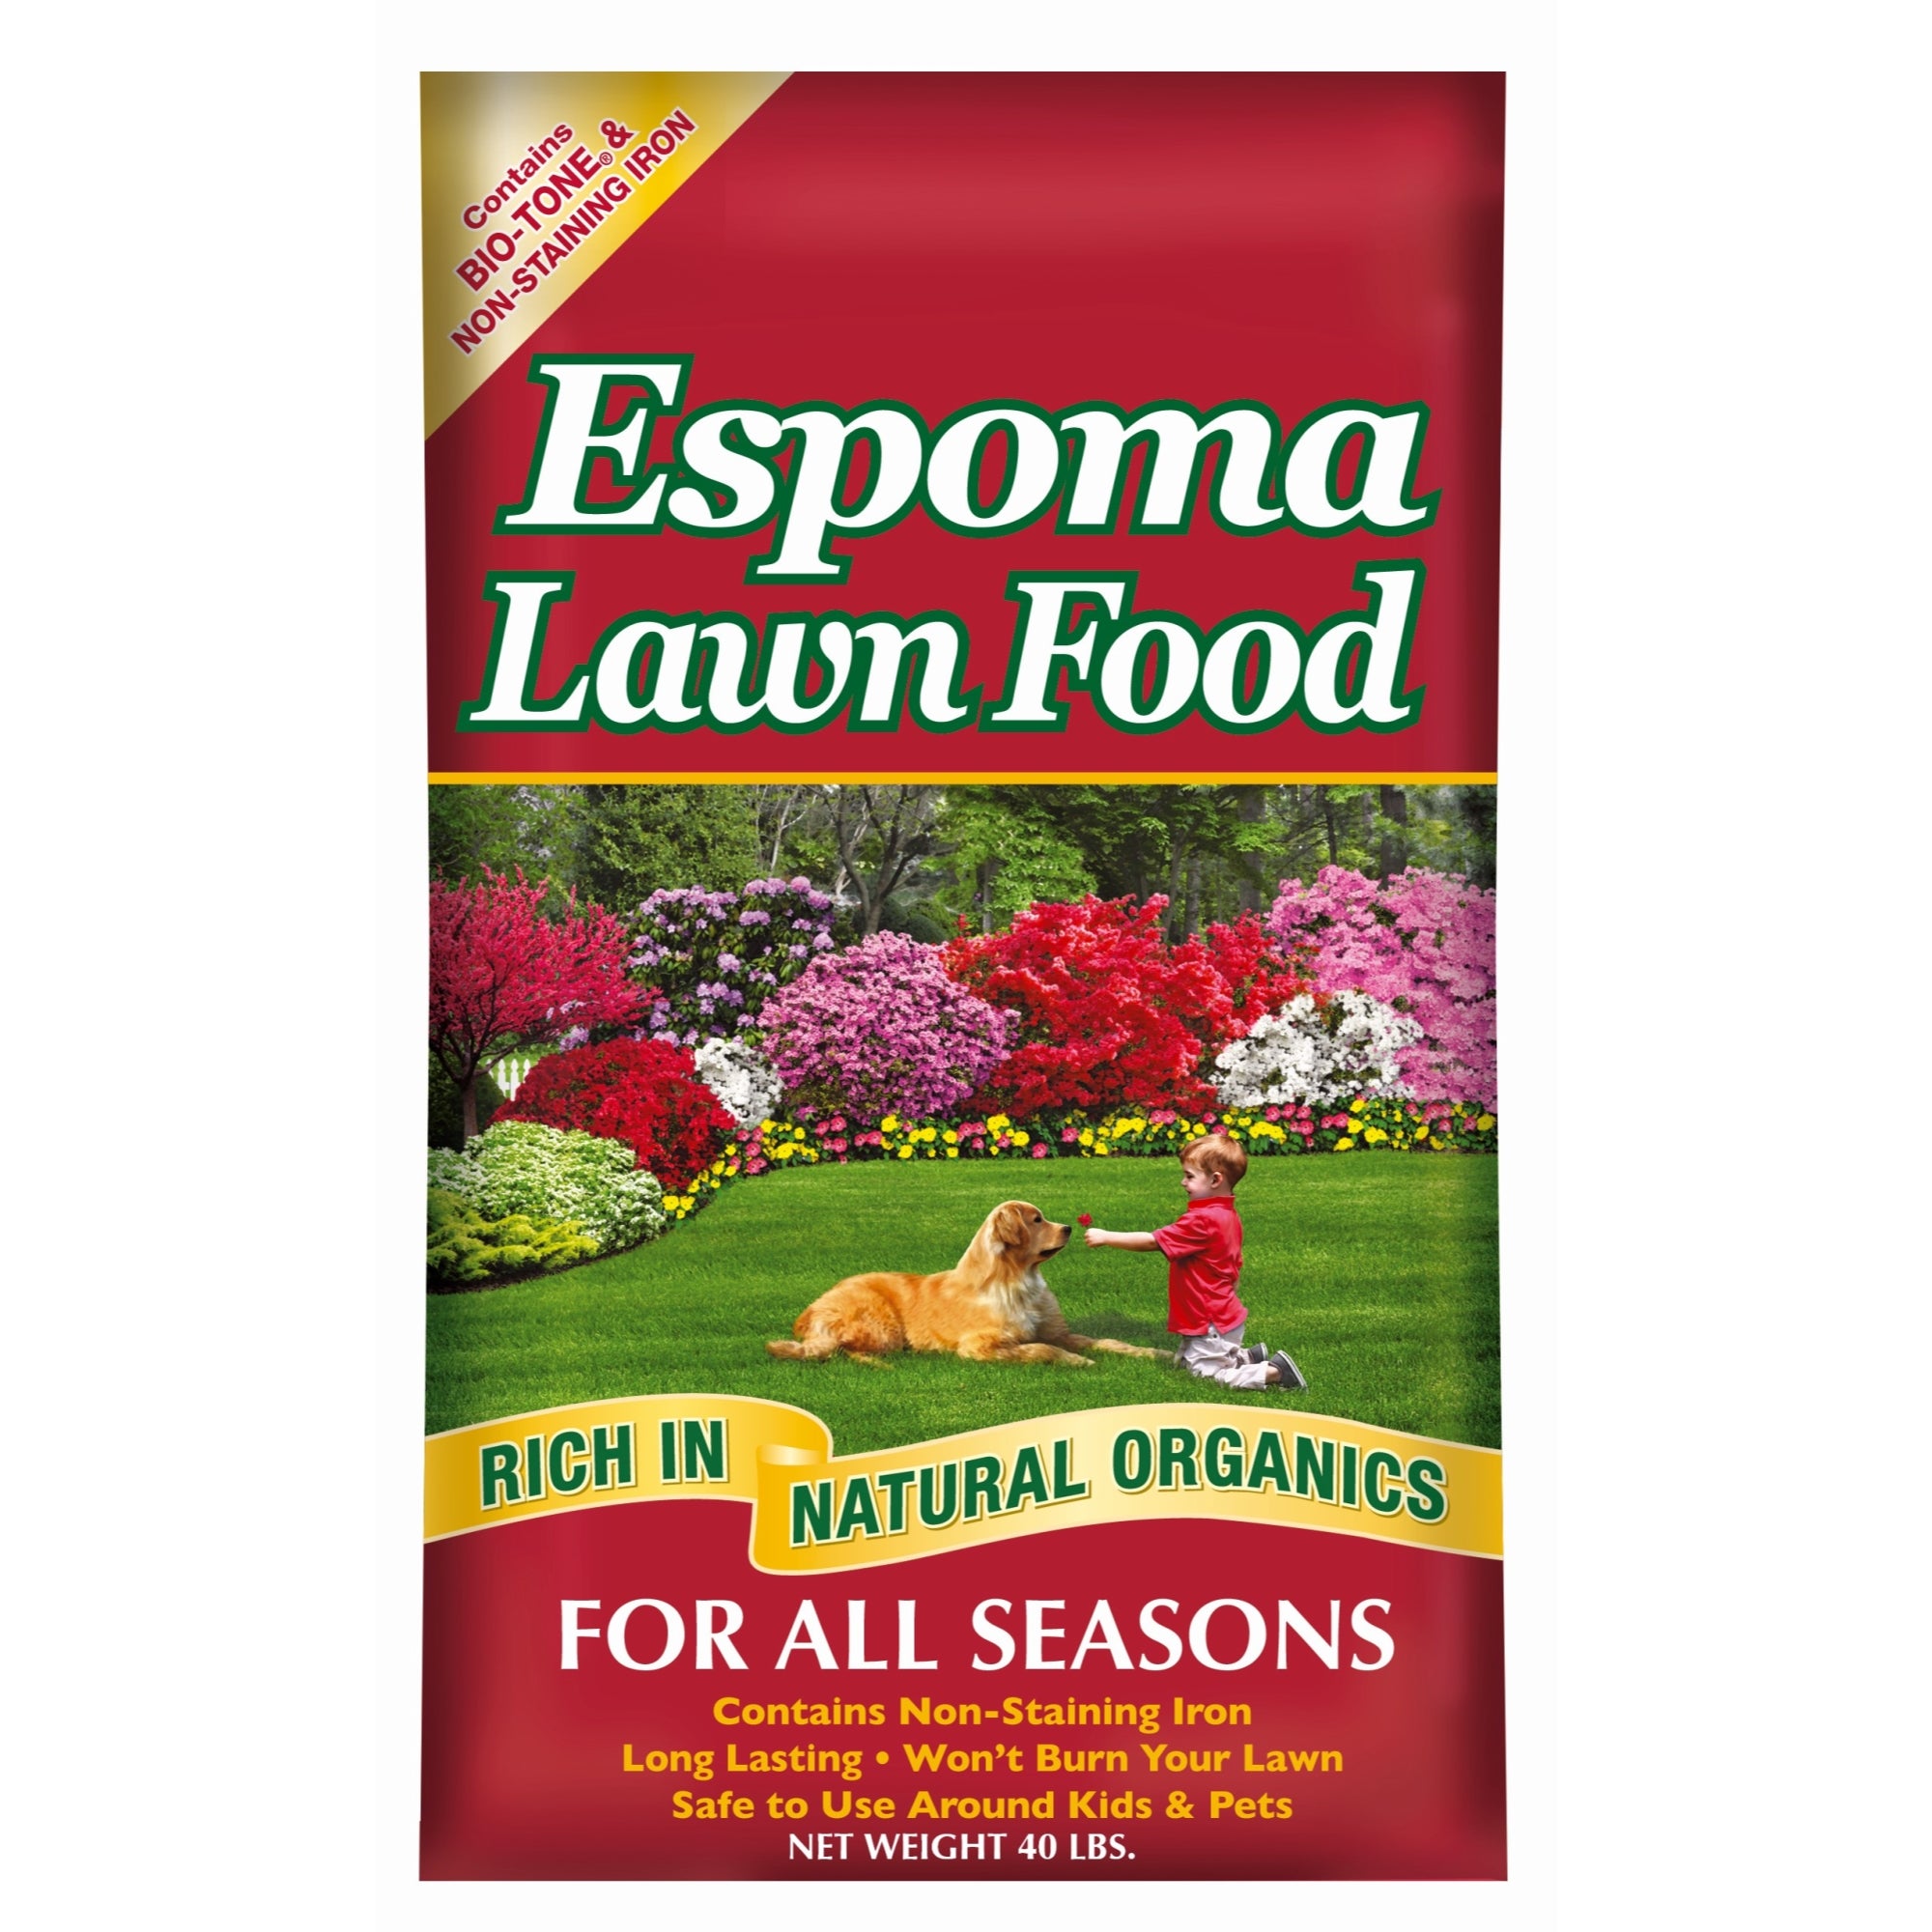 Espoma 15-0-5 Lawn Food, Rich in Natural Organics, for All Seasons, Contains Bio-tone & Non-Staining Iron, Safe to Use Around Kids & Pets